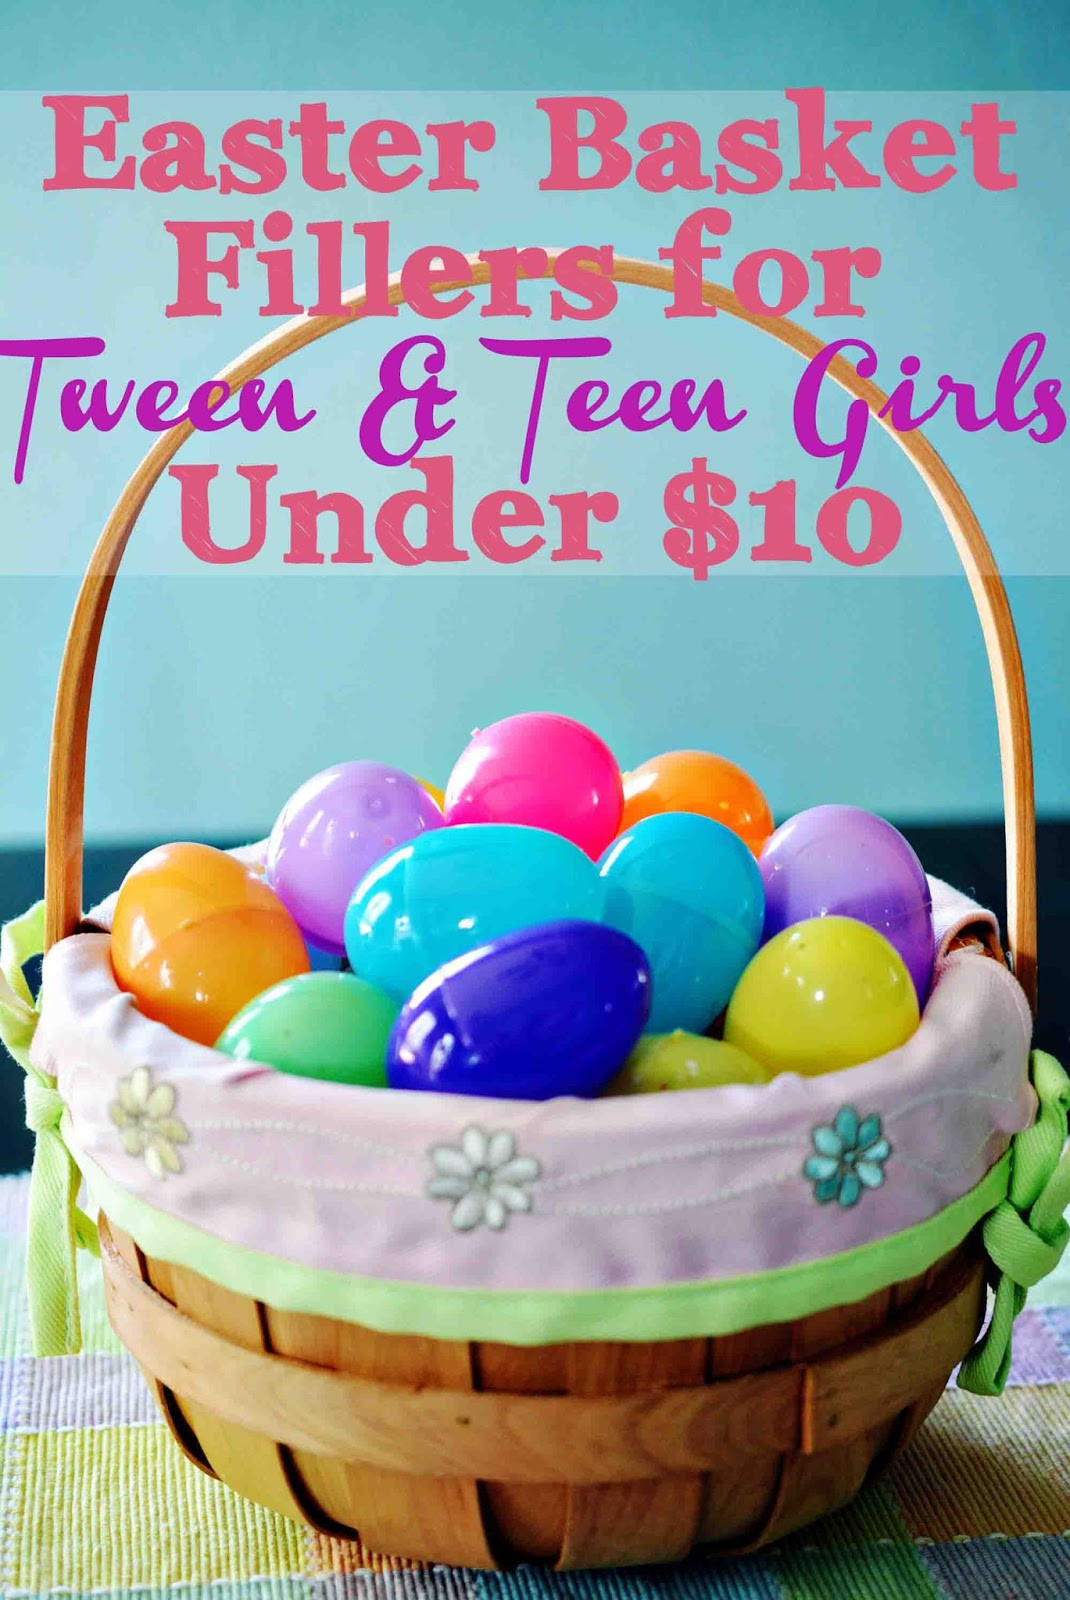 Ideas For Easter Egg Fillers
 Theresa s Mixed Nuts Tween & Teen Girl Easter Basket